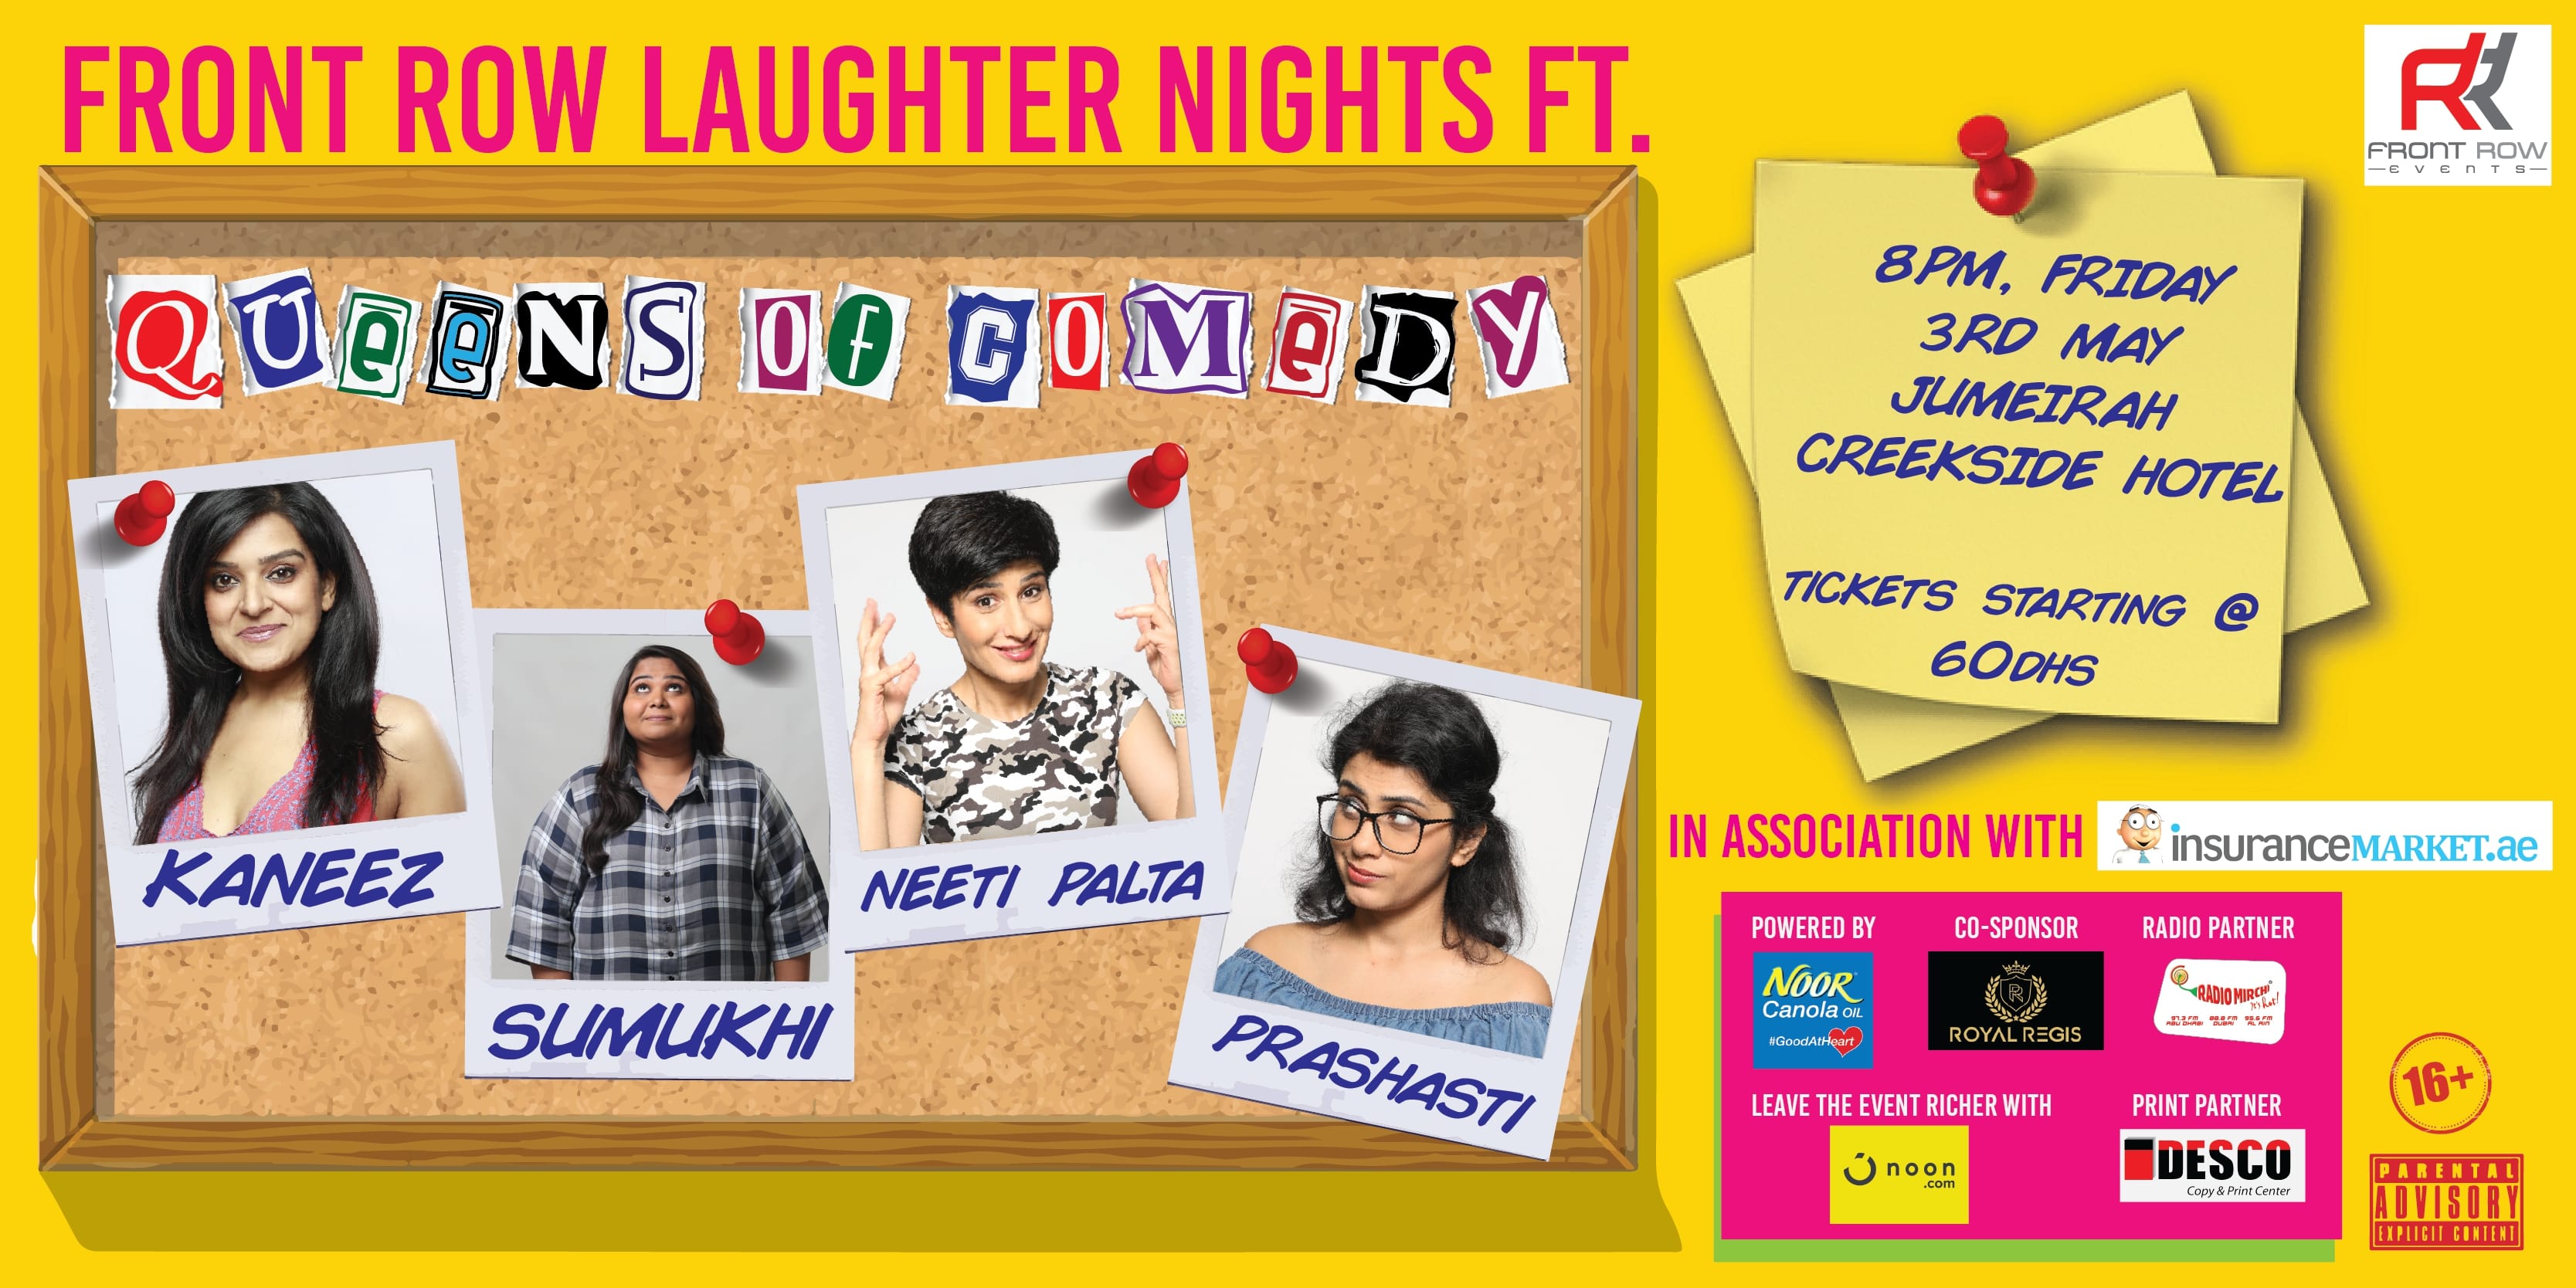 FRONT ROW LAUGHTER NIGHT ft Queens of Comedy